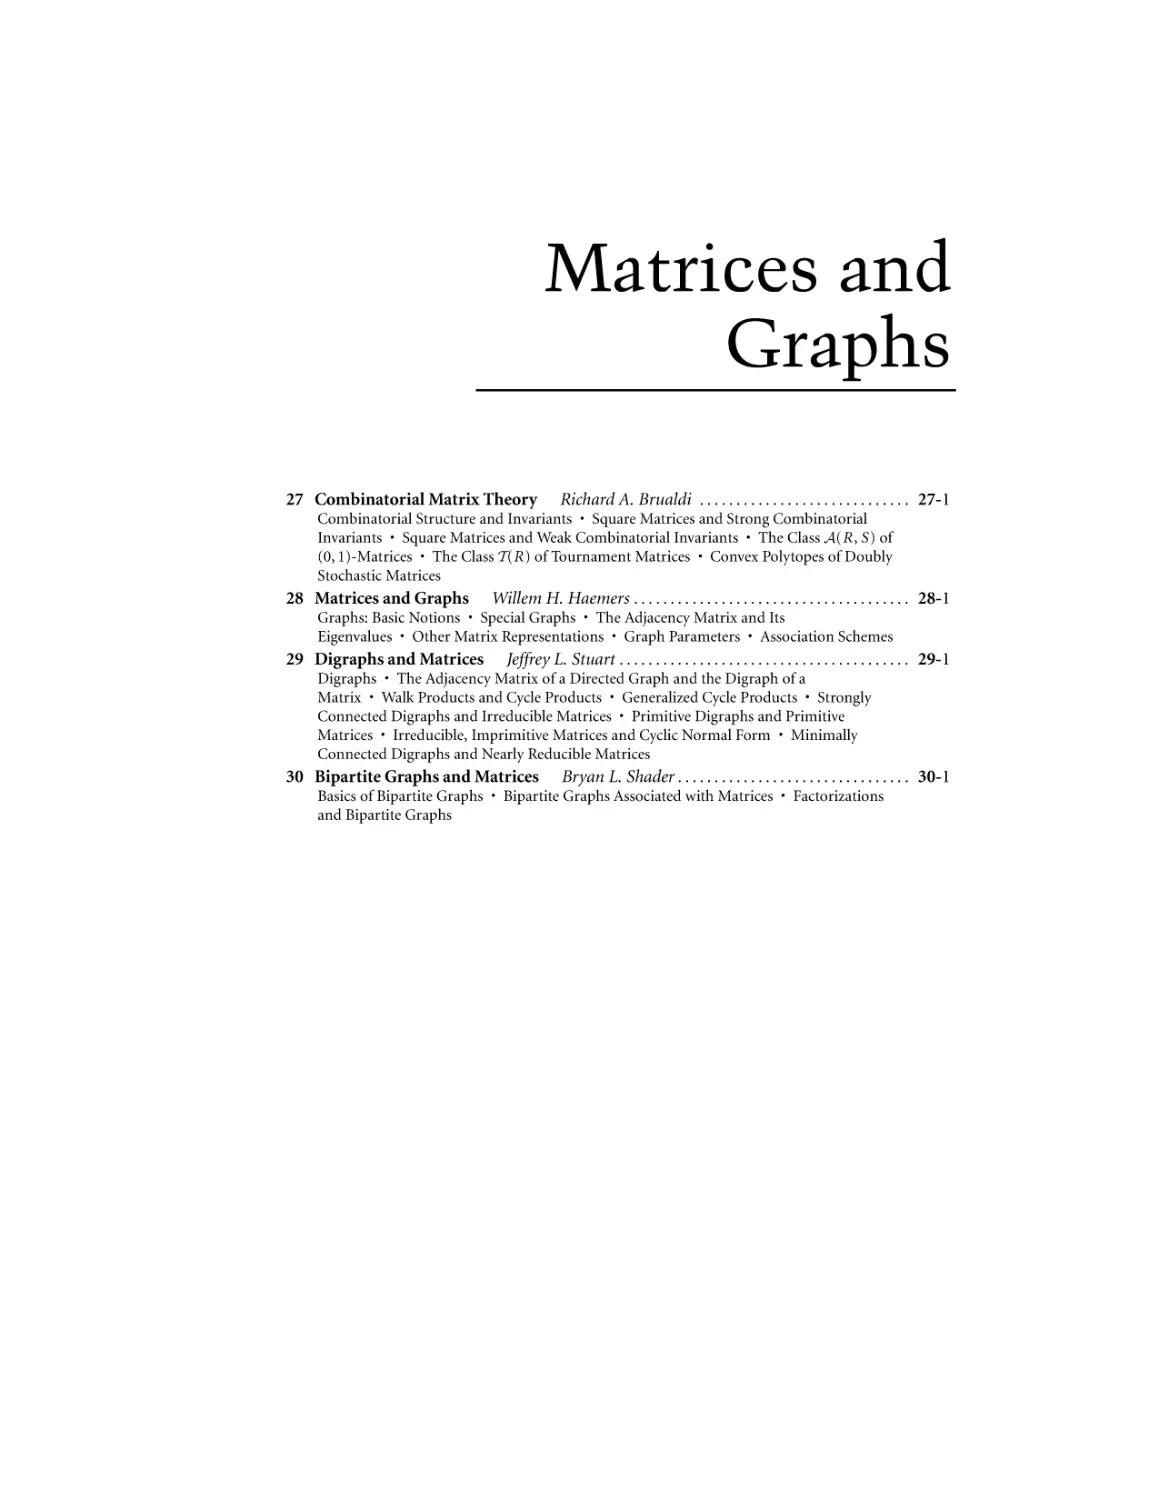 Martices and Graphs